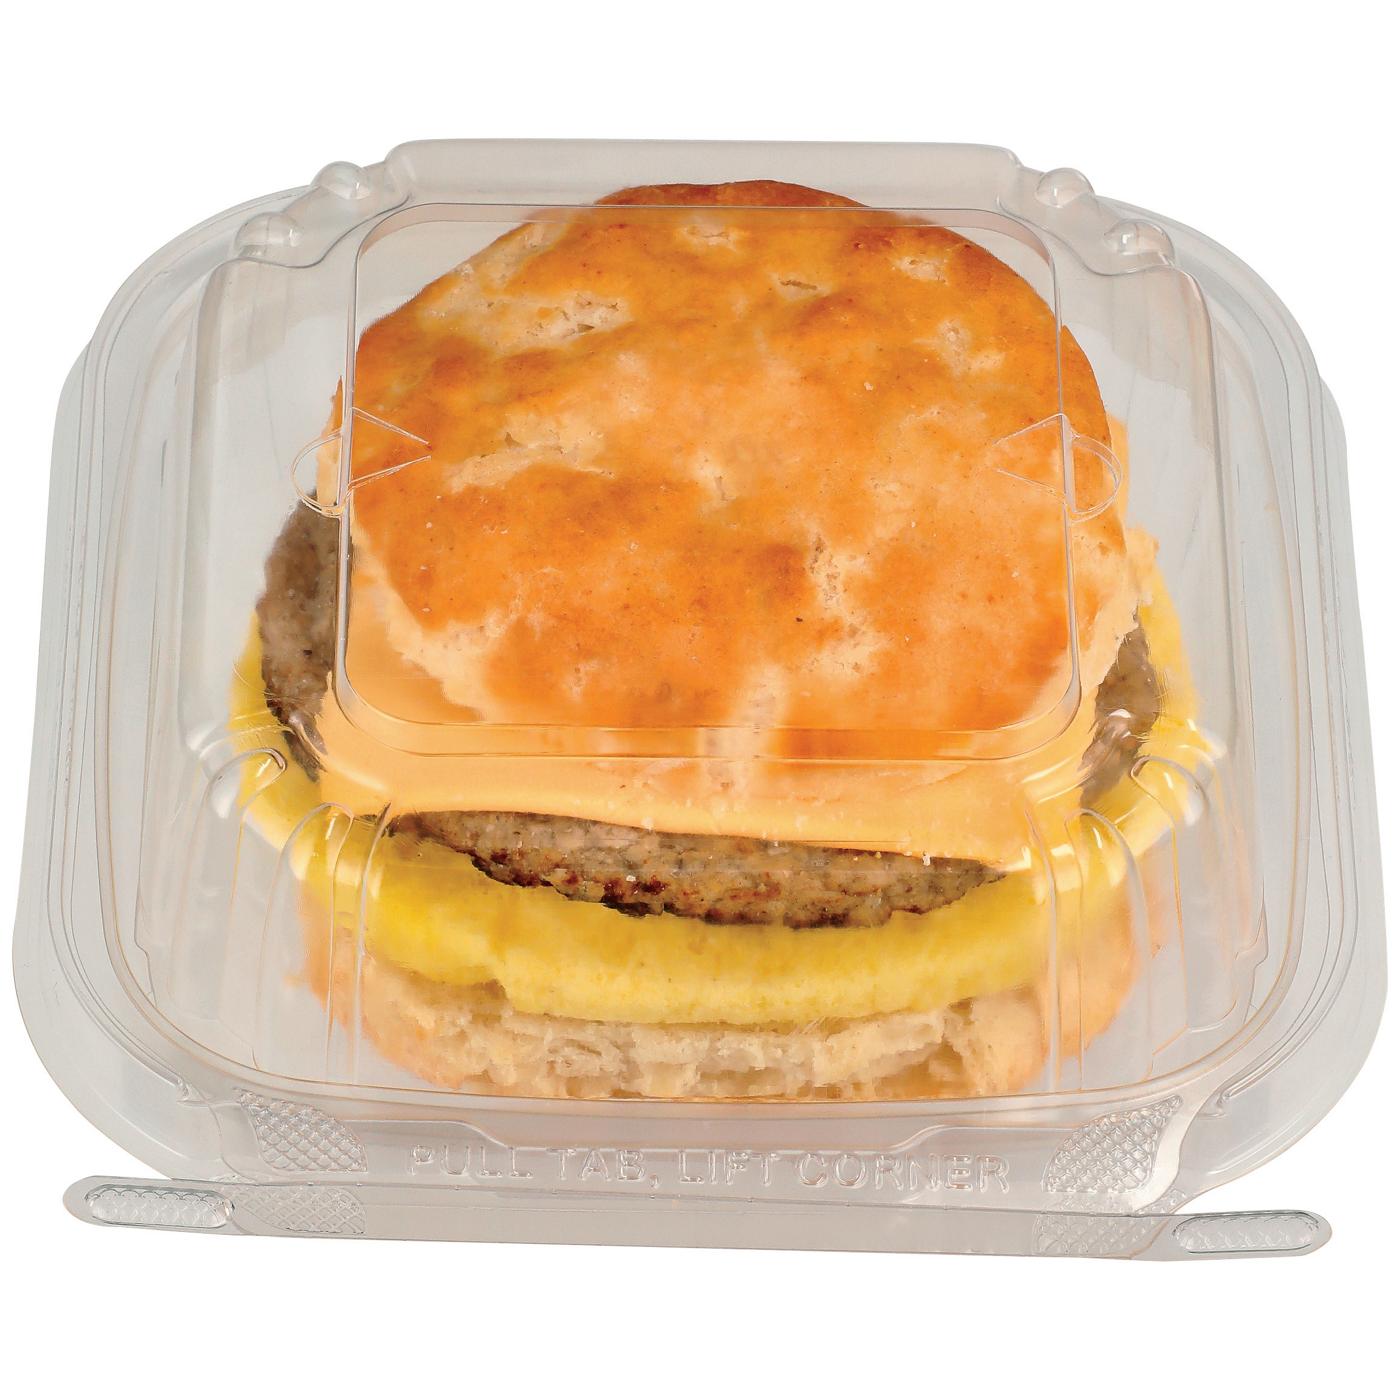 H-E-B Bakery Breakfast Biscuit Sandwich - Sausage, Egg & Cheese; image 1 of 4